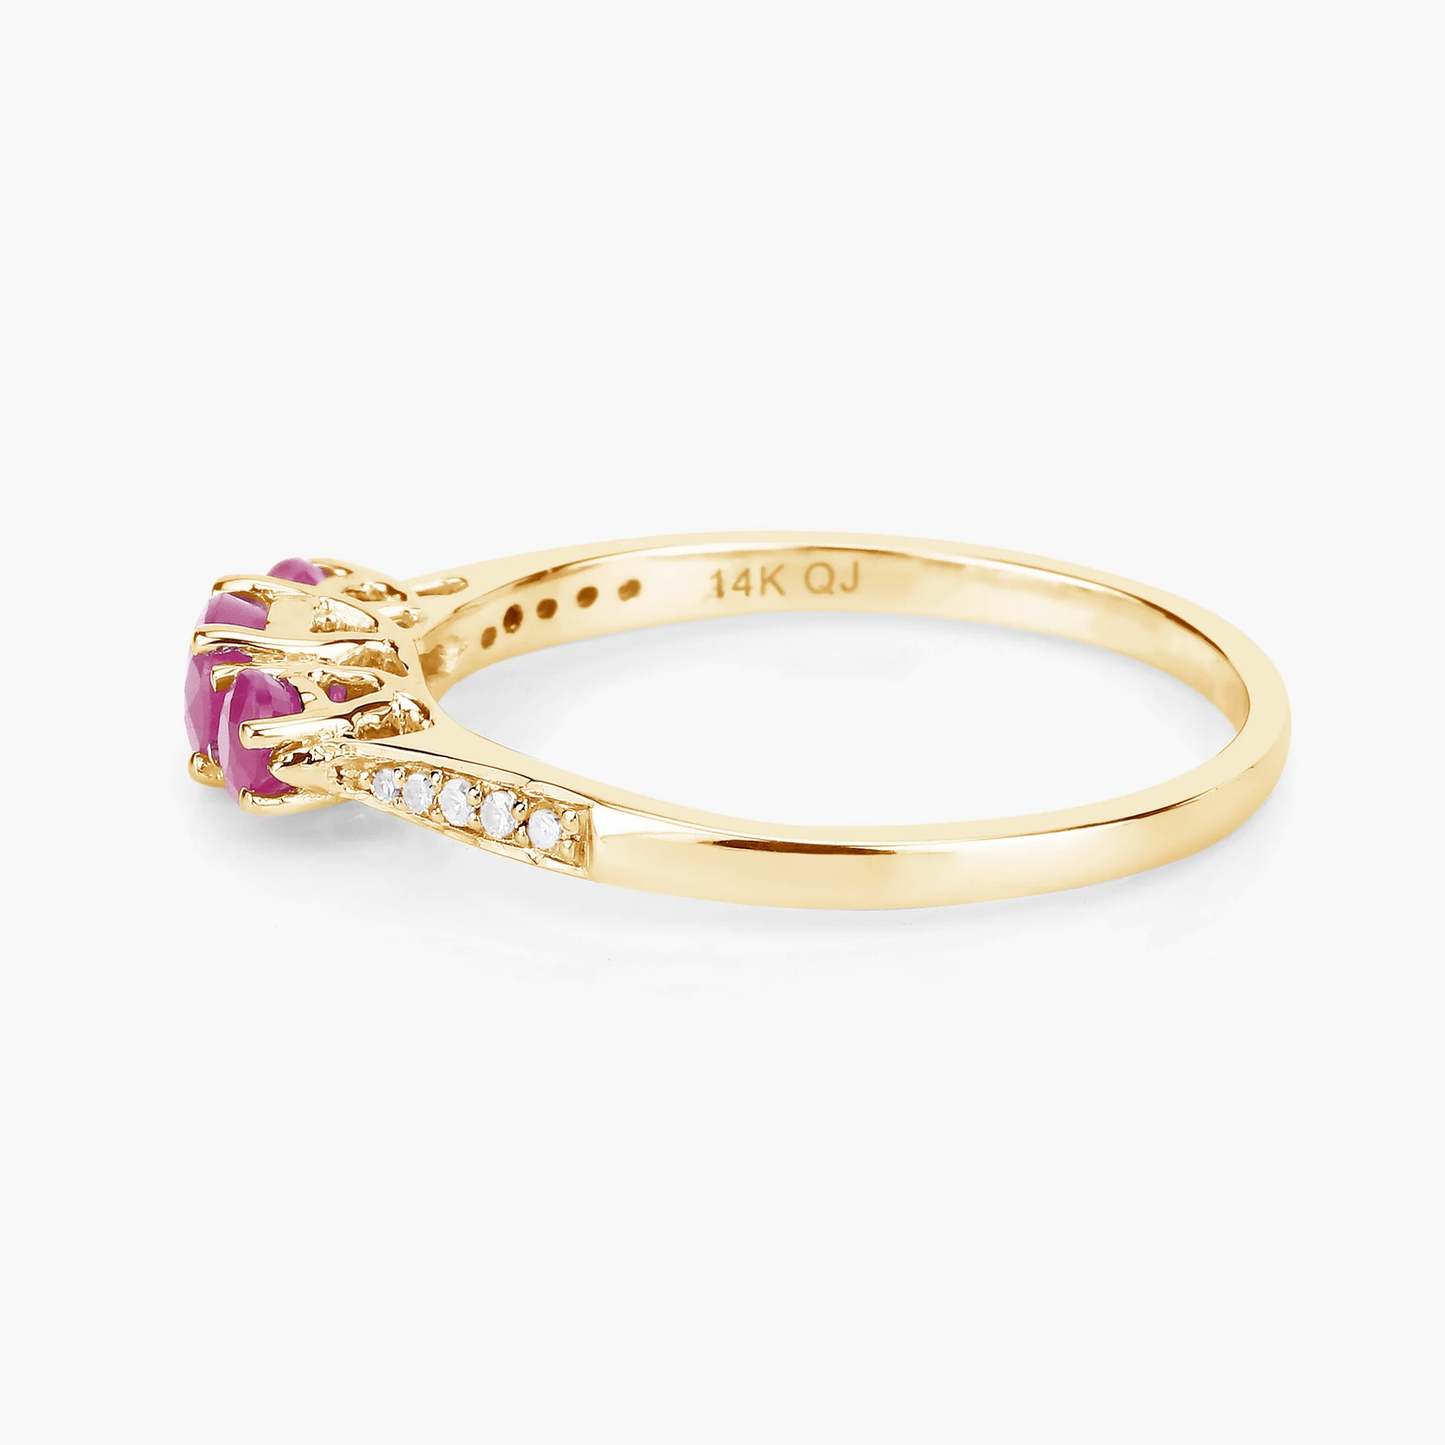 3 Stone Round Ruby and 10 White Diamonds Ring in 14K Yellow Gold 